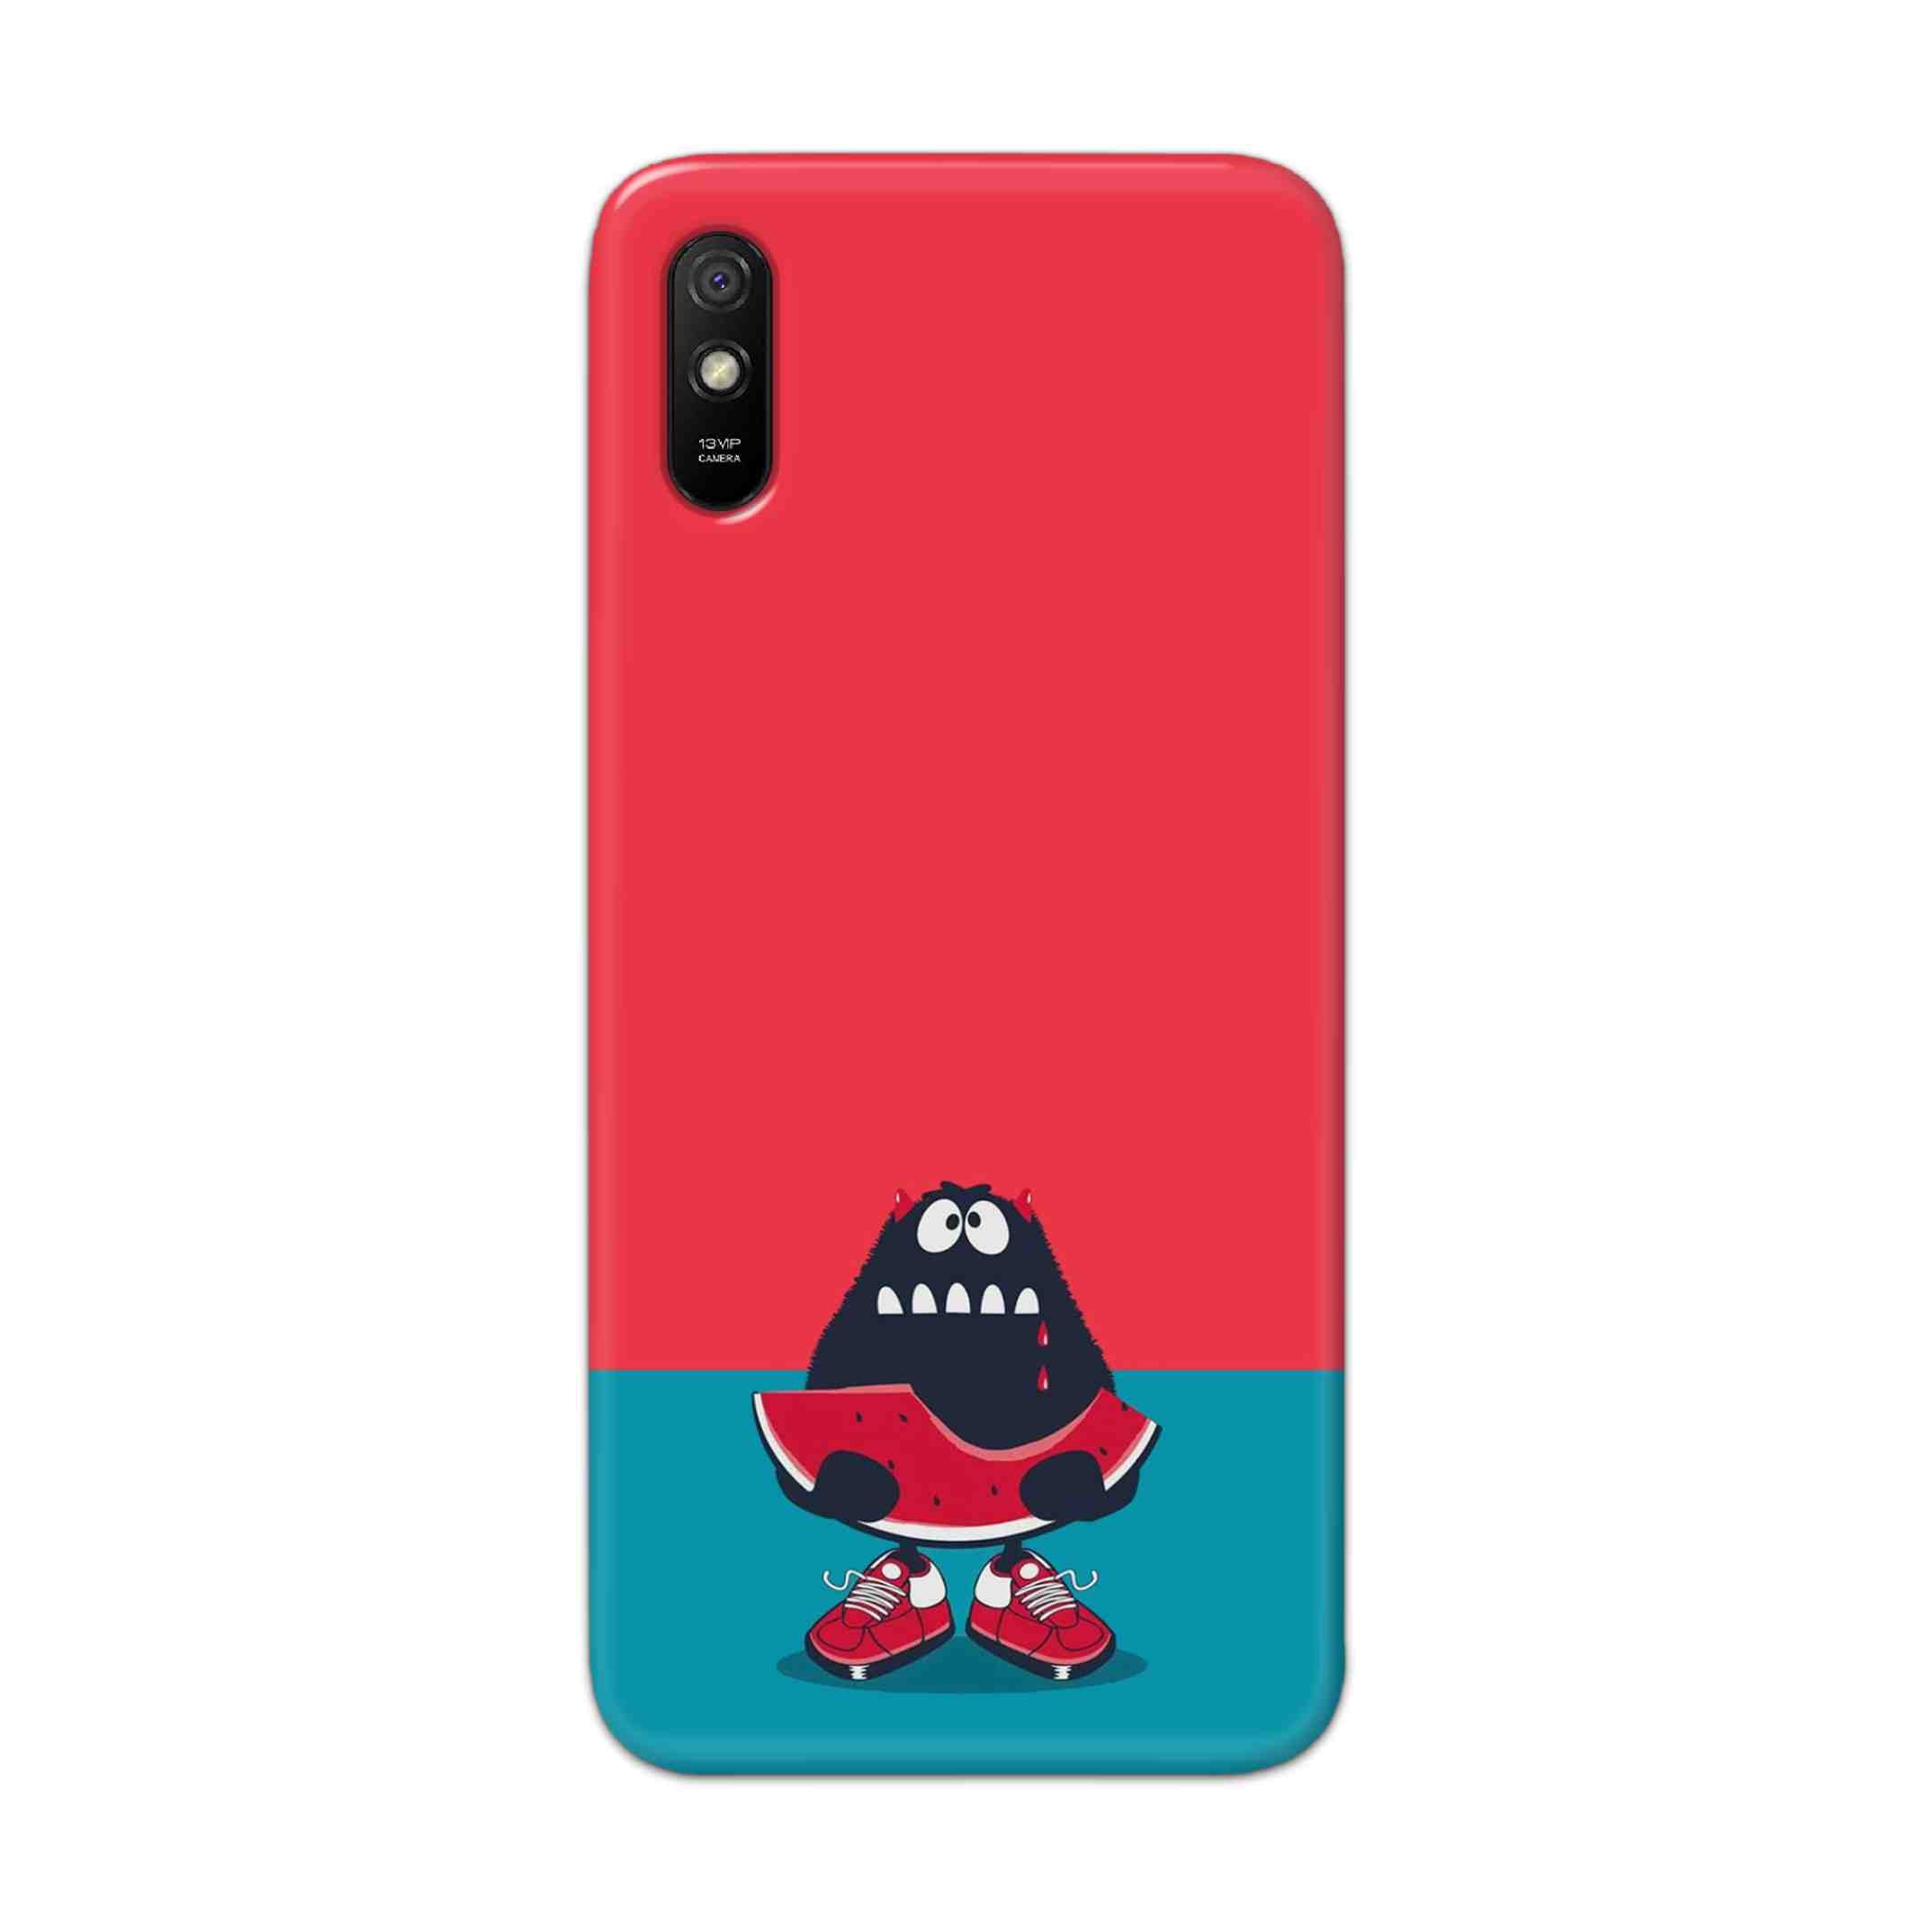 Buy Watermelon Hard Back Mobile Phone Case Cover For Redmi 9A Online